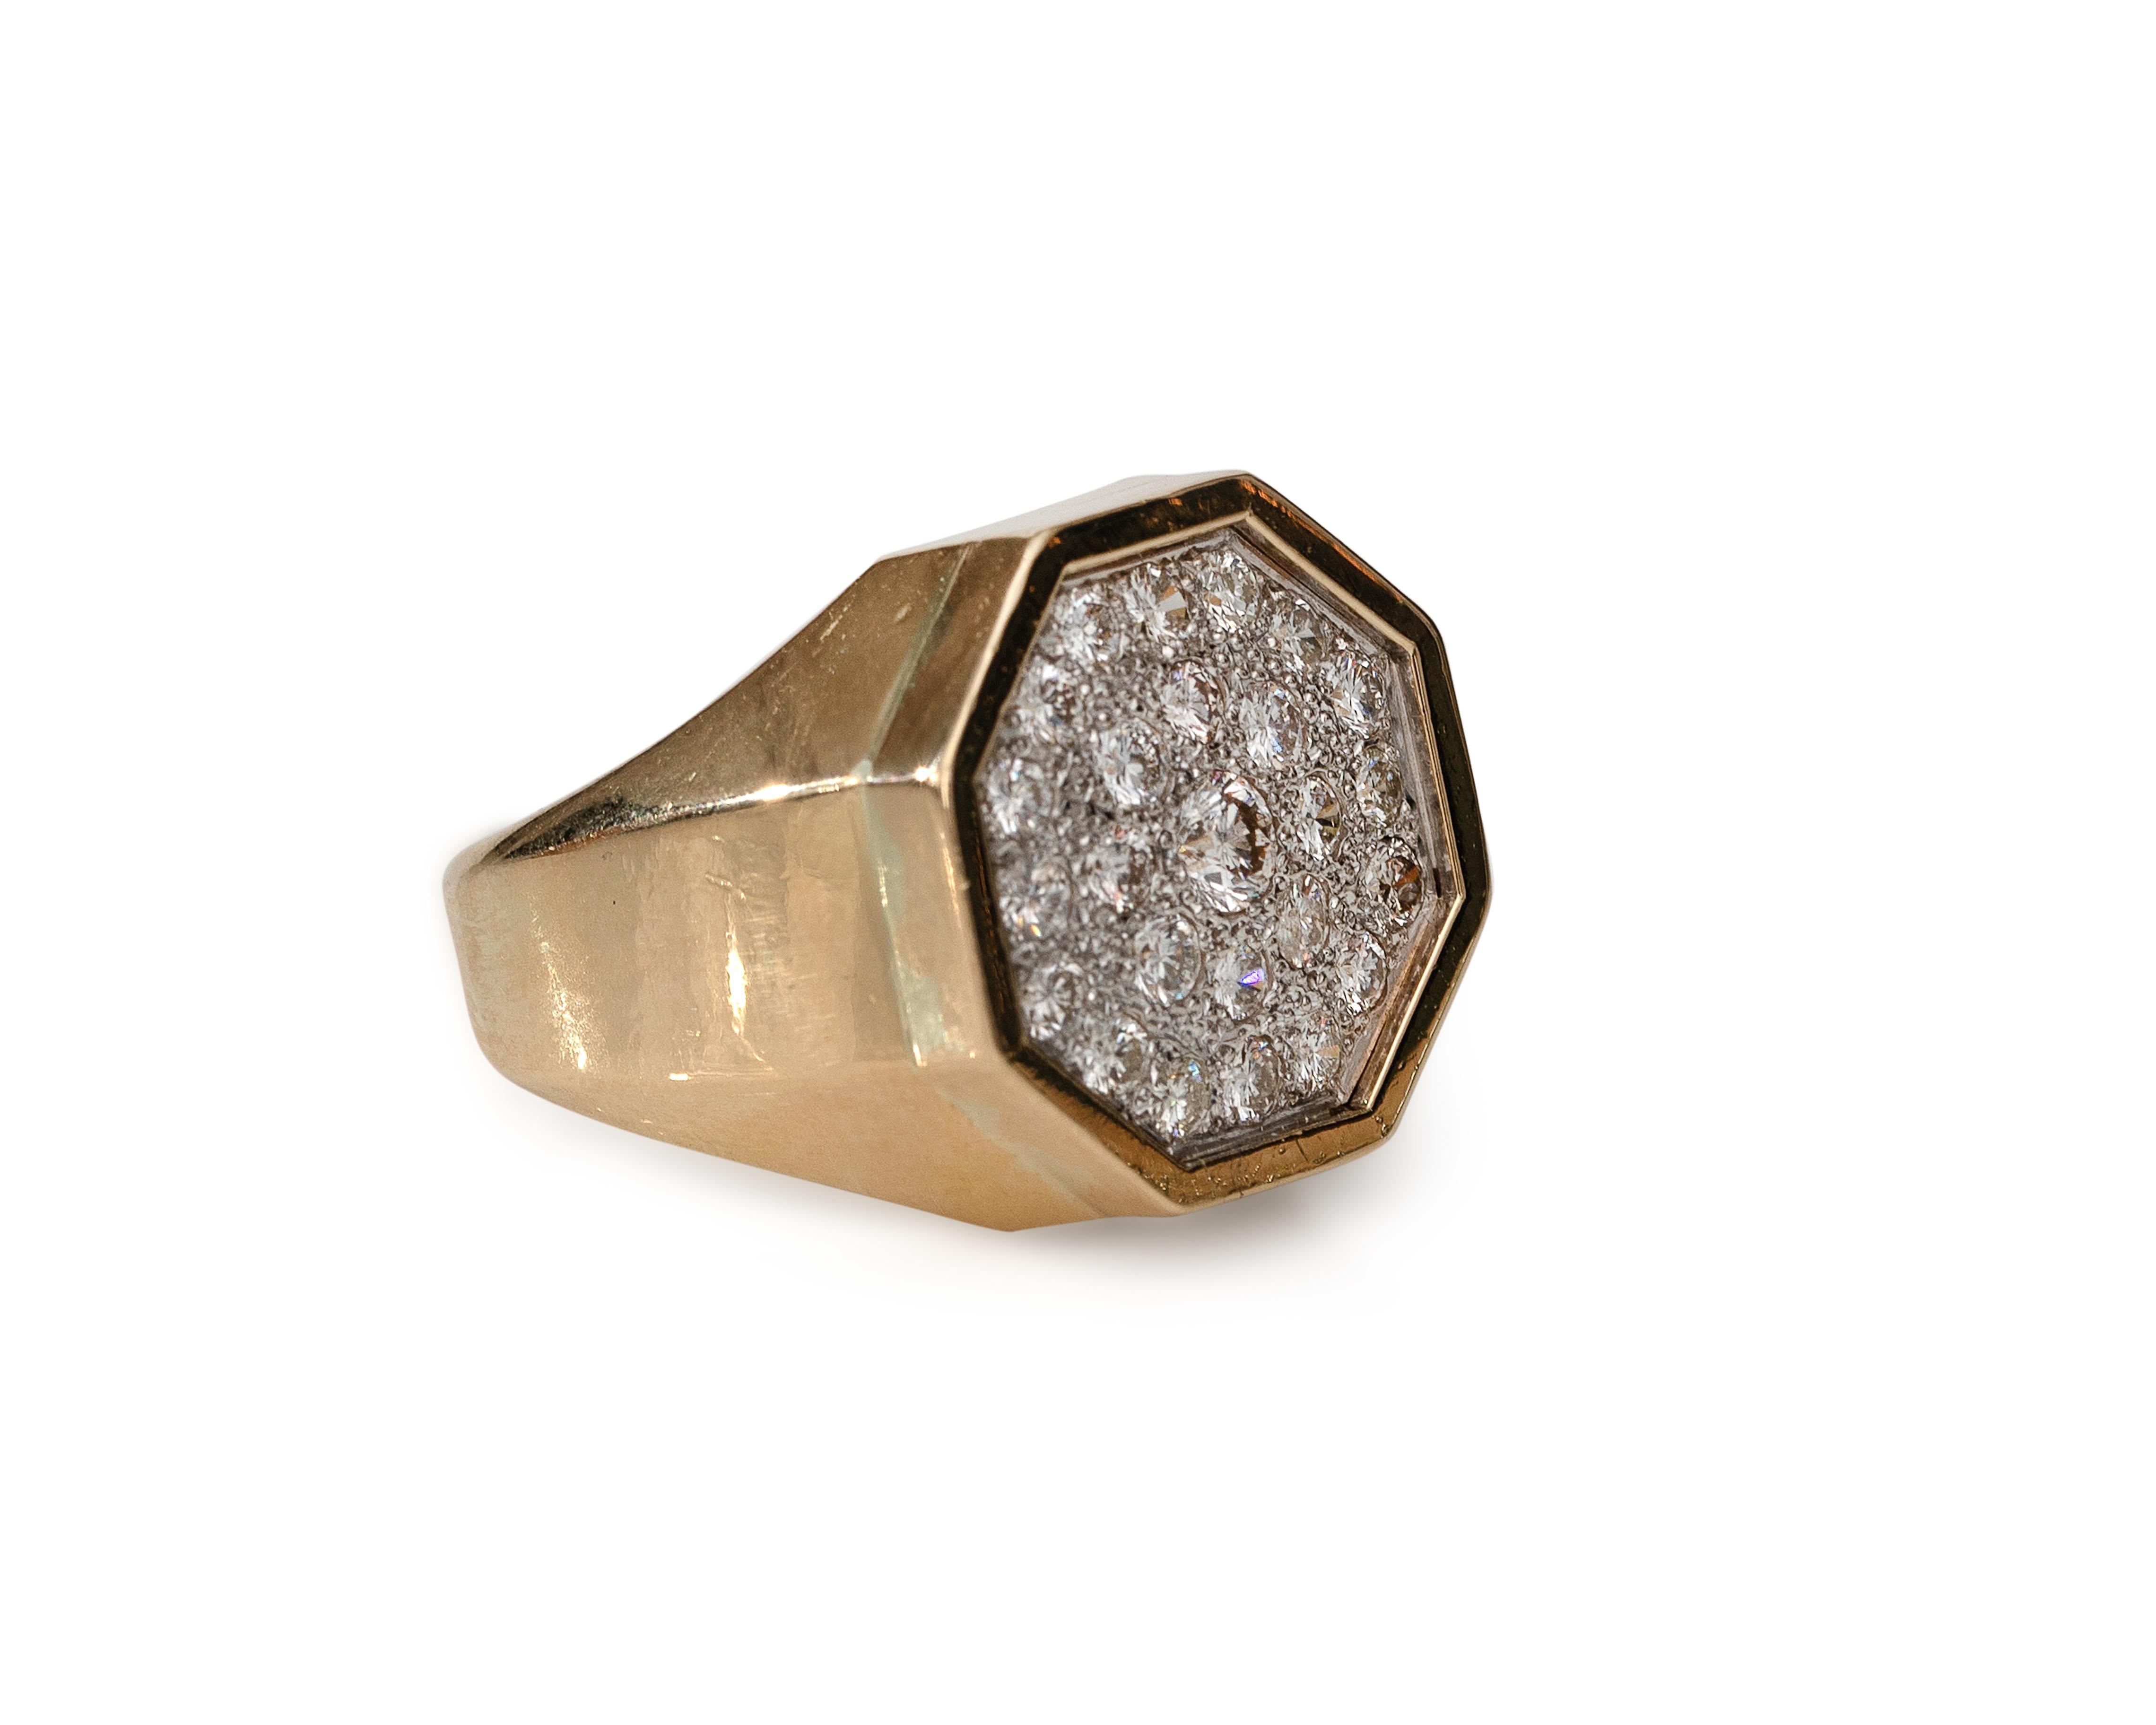 Large Ornate Octagonal Shaped Diamond Cluster Ring crafted in beautiful 18 karat yellow gold. This stunning ring is from the 1950s and features a carat of diamonds. 

Ring Details:
Metal type: 18 karat yellow gold
Ring Size: 7.75
Weight: 18